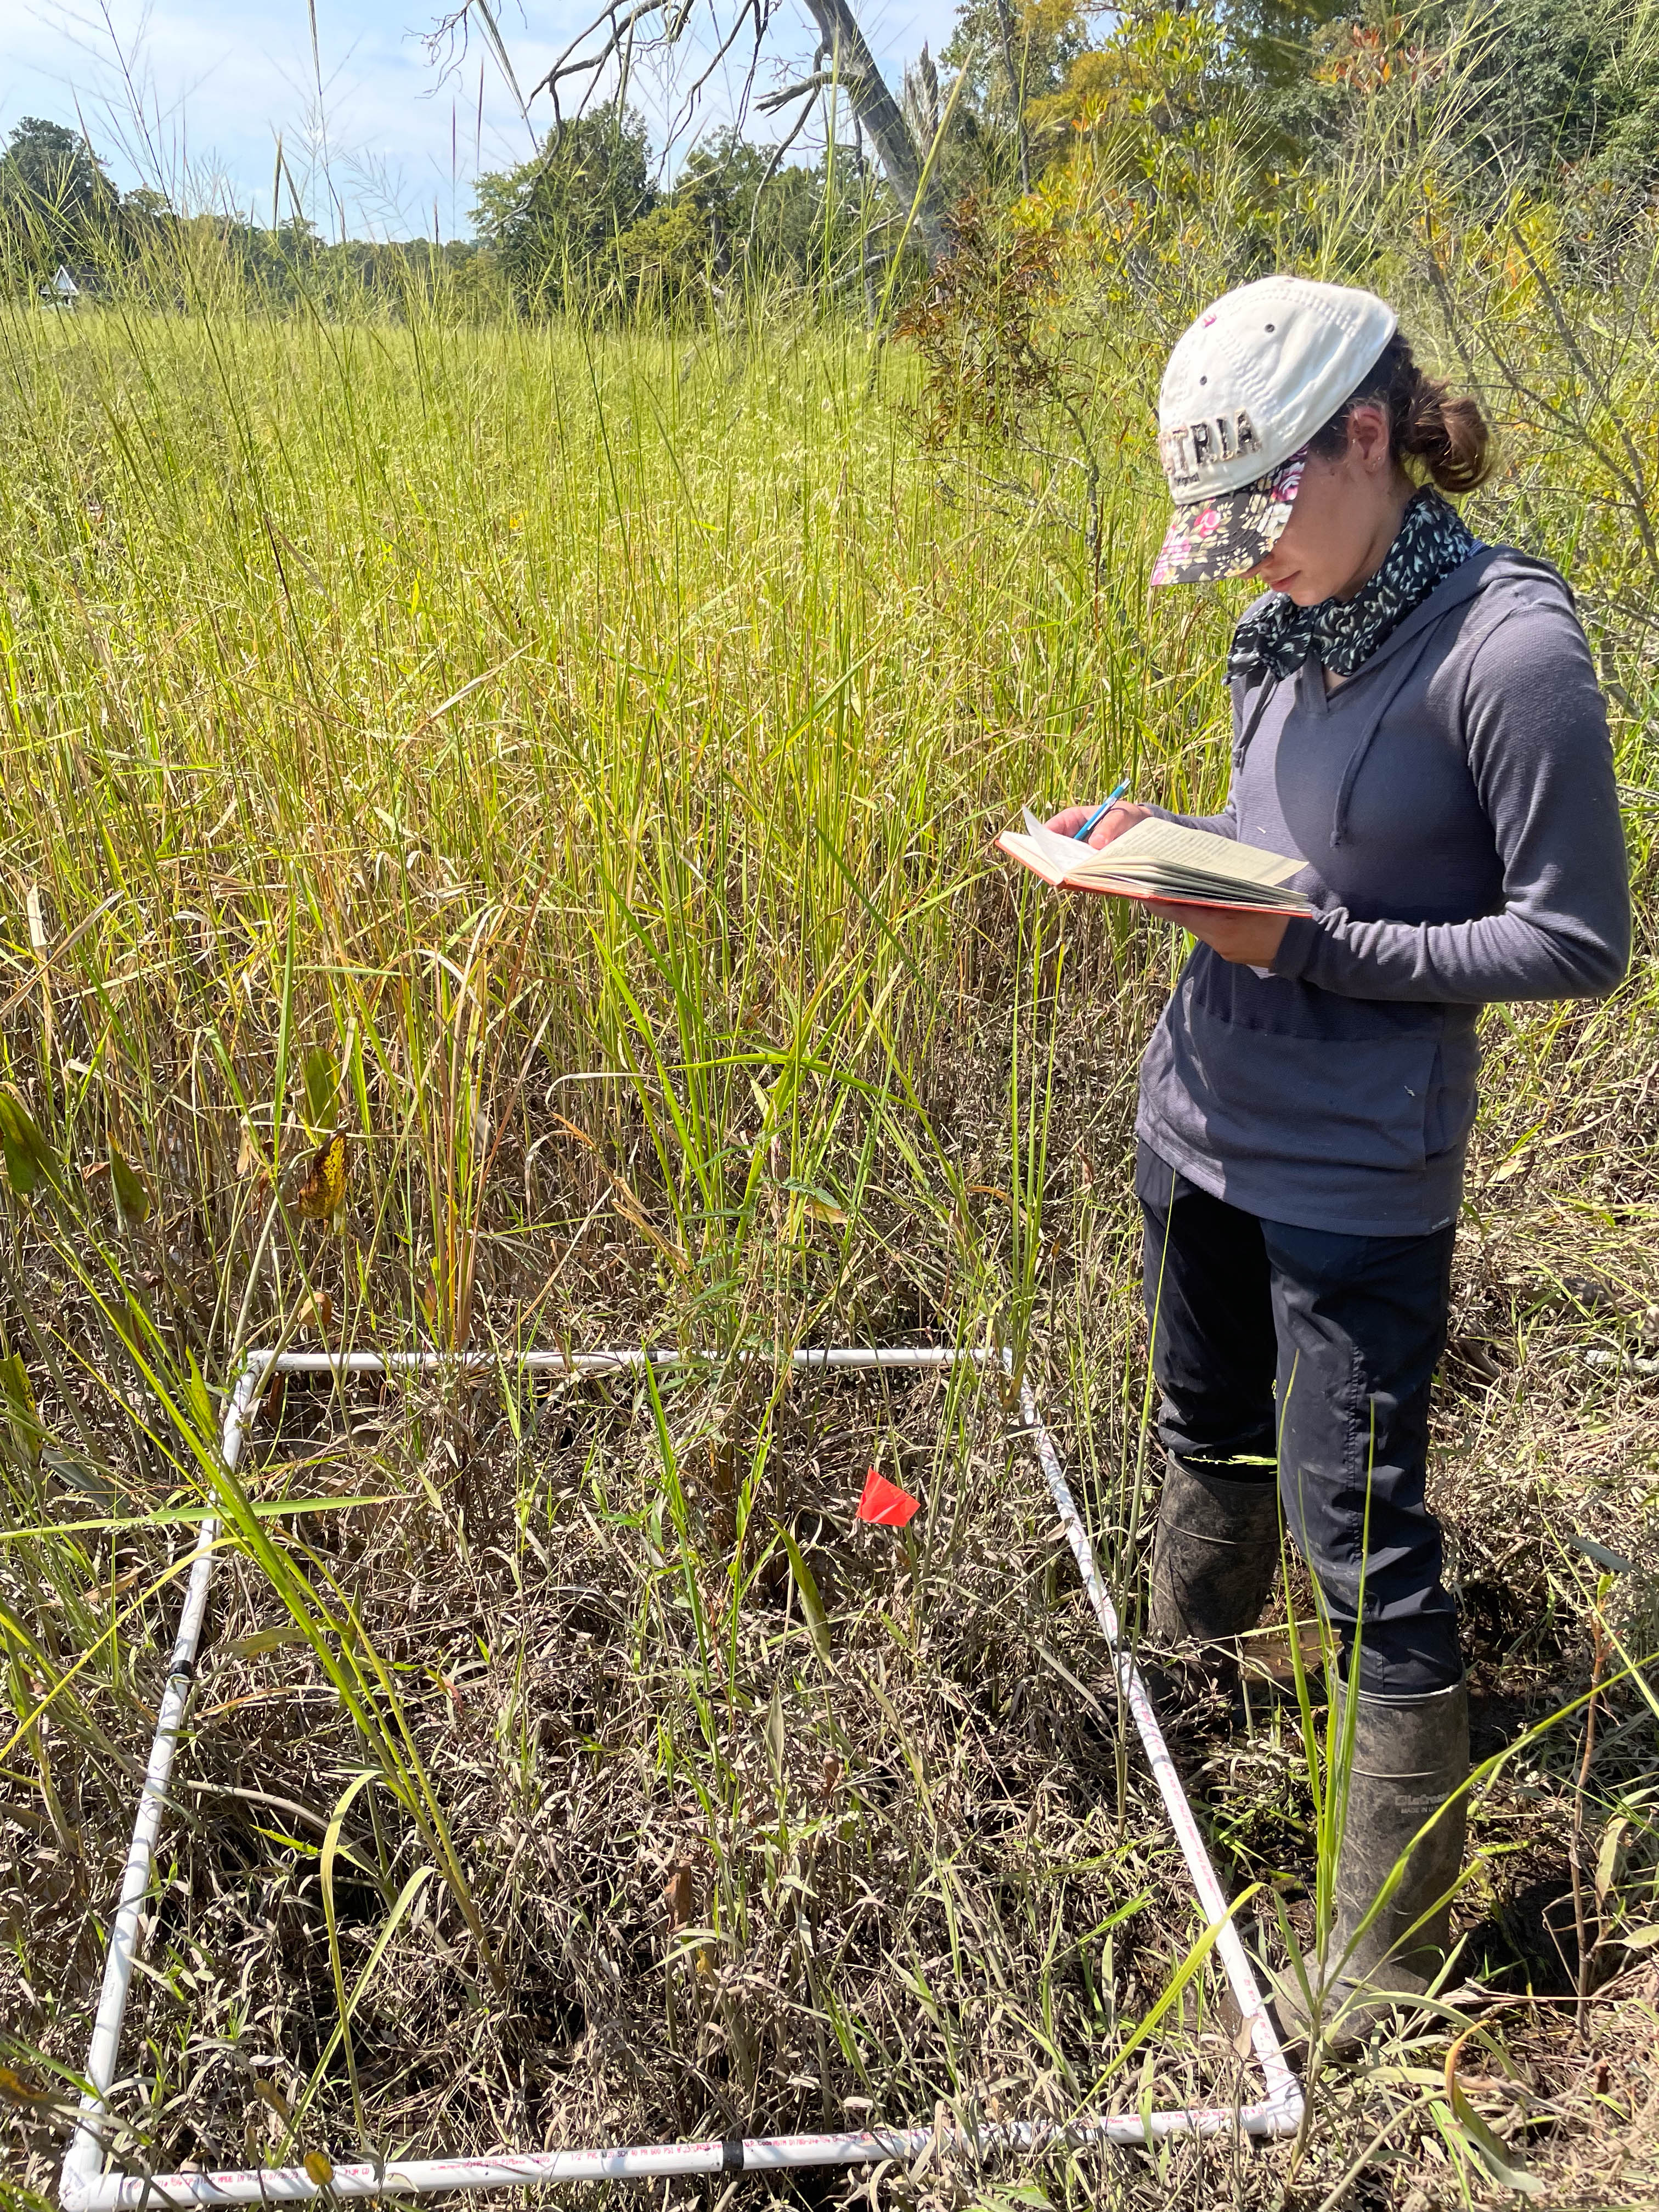 Biology major Abigail DeCesare ’24 received an Honors Fellowship through the Charles Center to examine the environmental characteristics of a federally threatened plant, the sensitive joint-vetch. (courtesy photo)